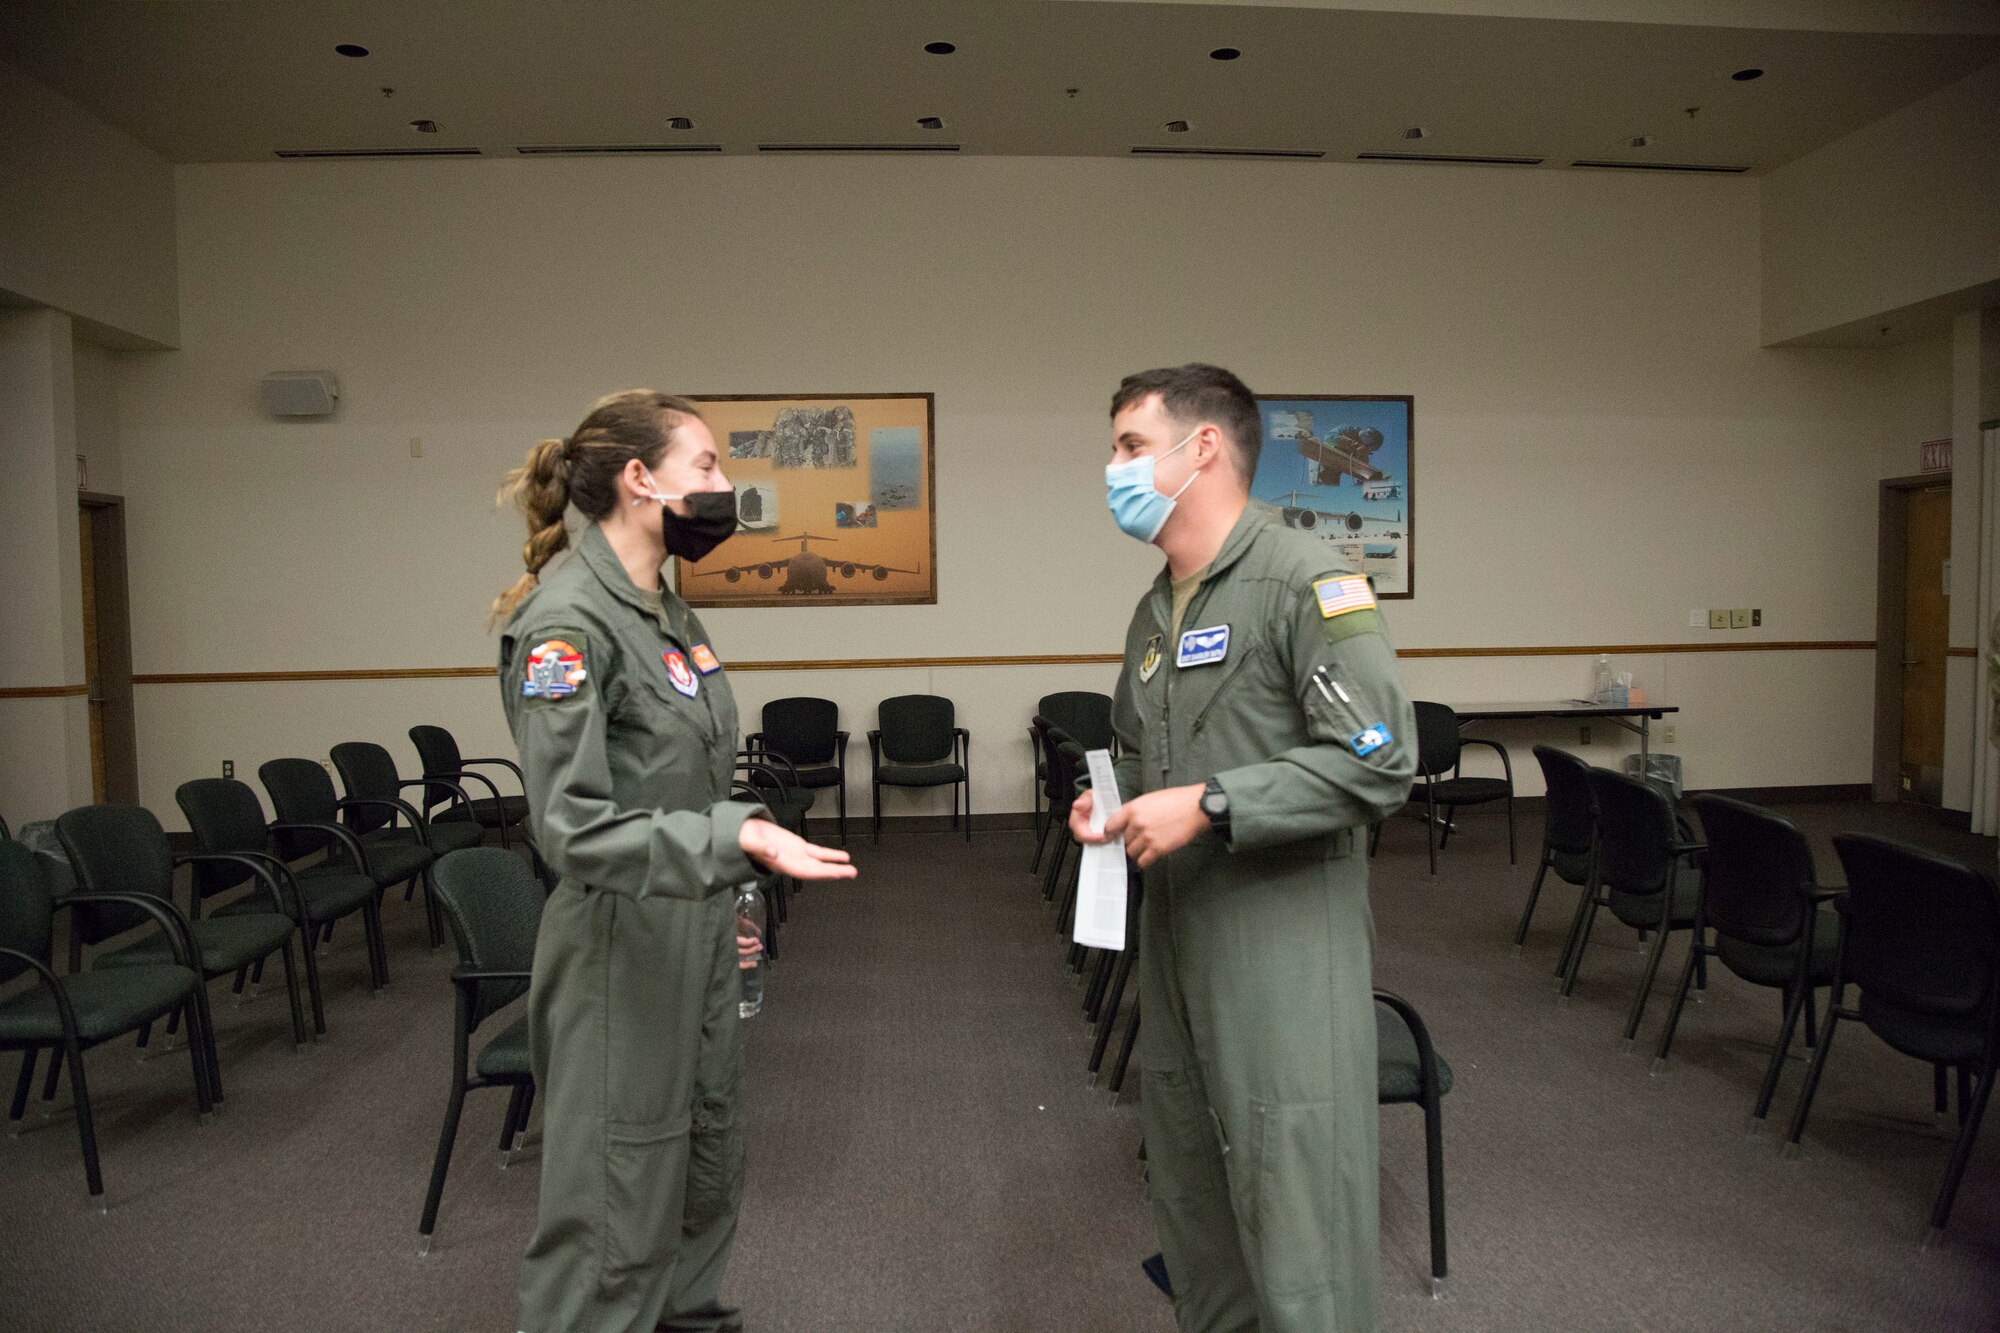 Two airmen talking to each other in an auditorium